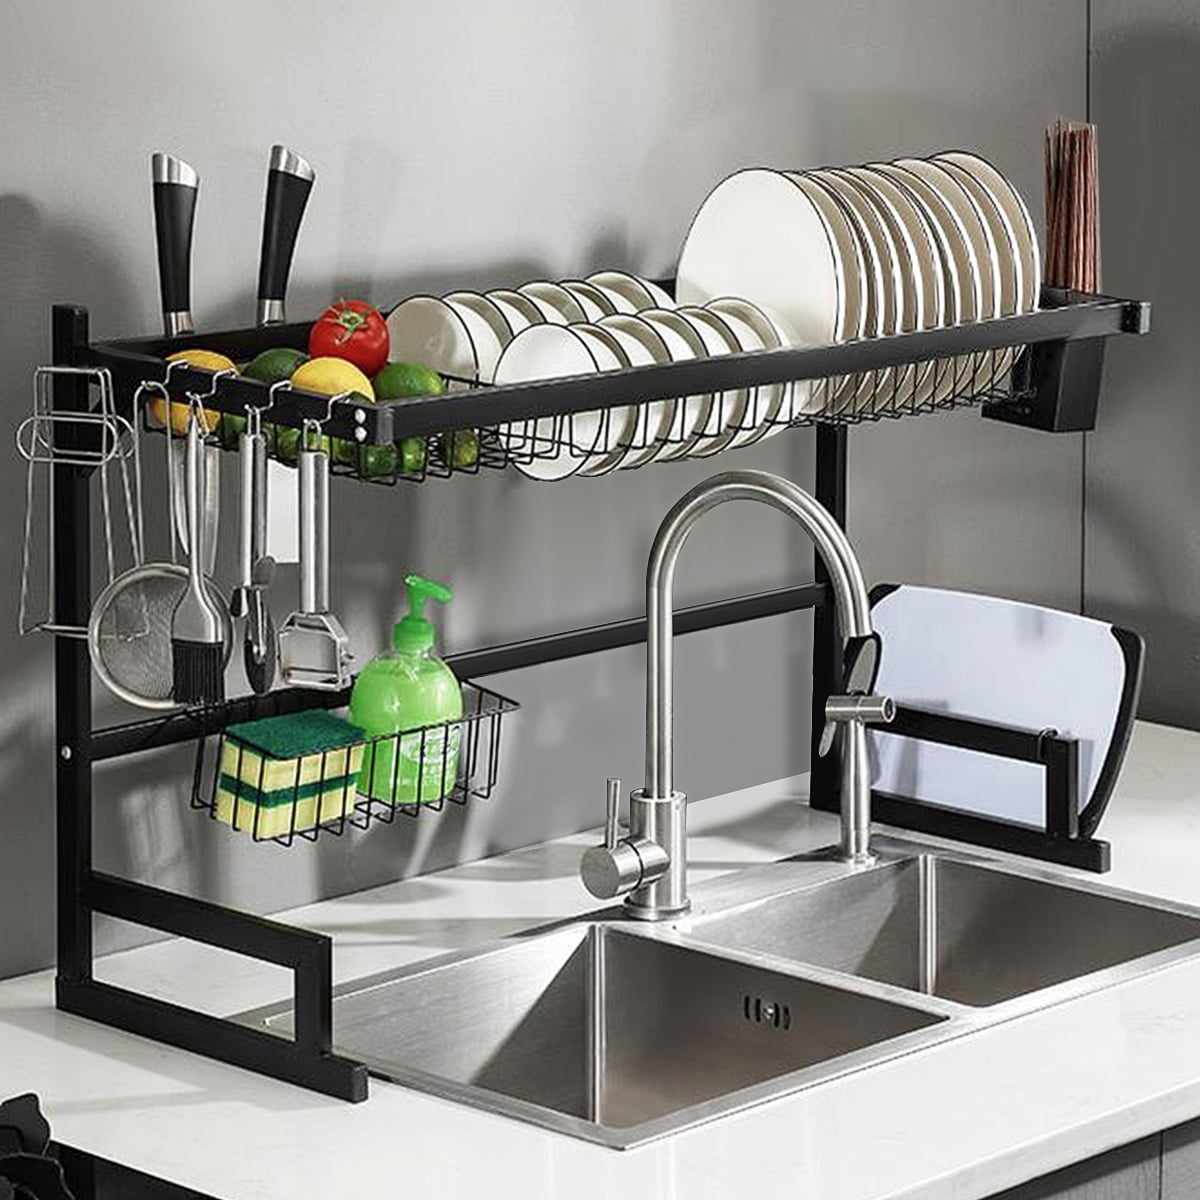 Stainless Steel 2 Tier Dish Drying Rack - Over Sink, Drainer Shelf 2 Tier Dish Drainer Stainless Steel